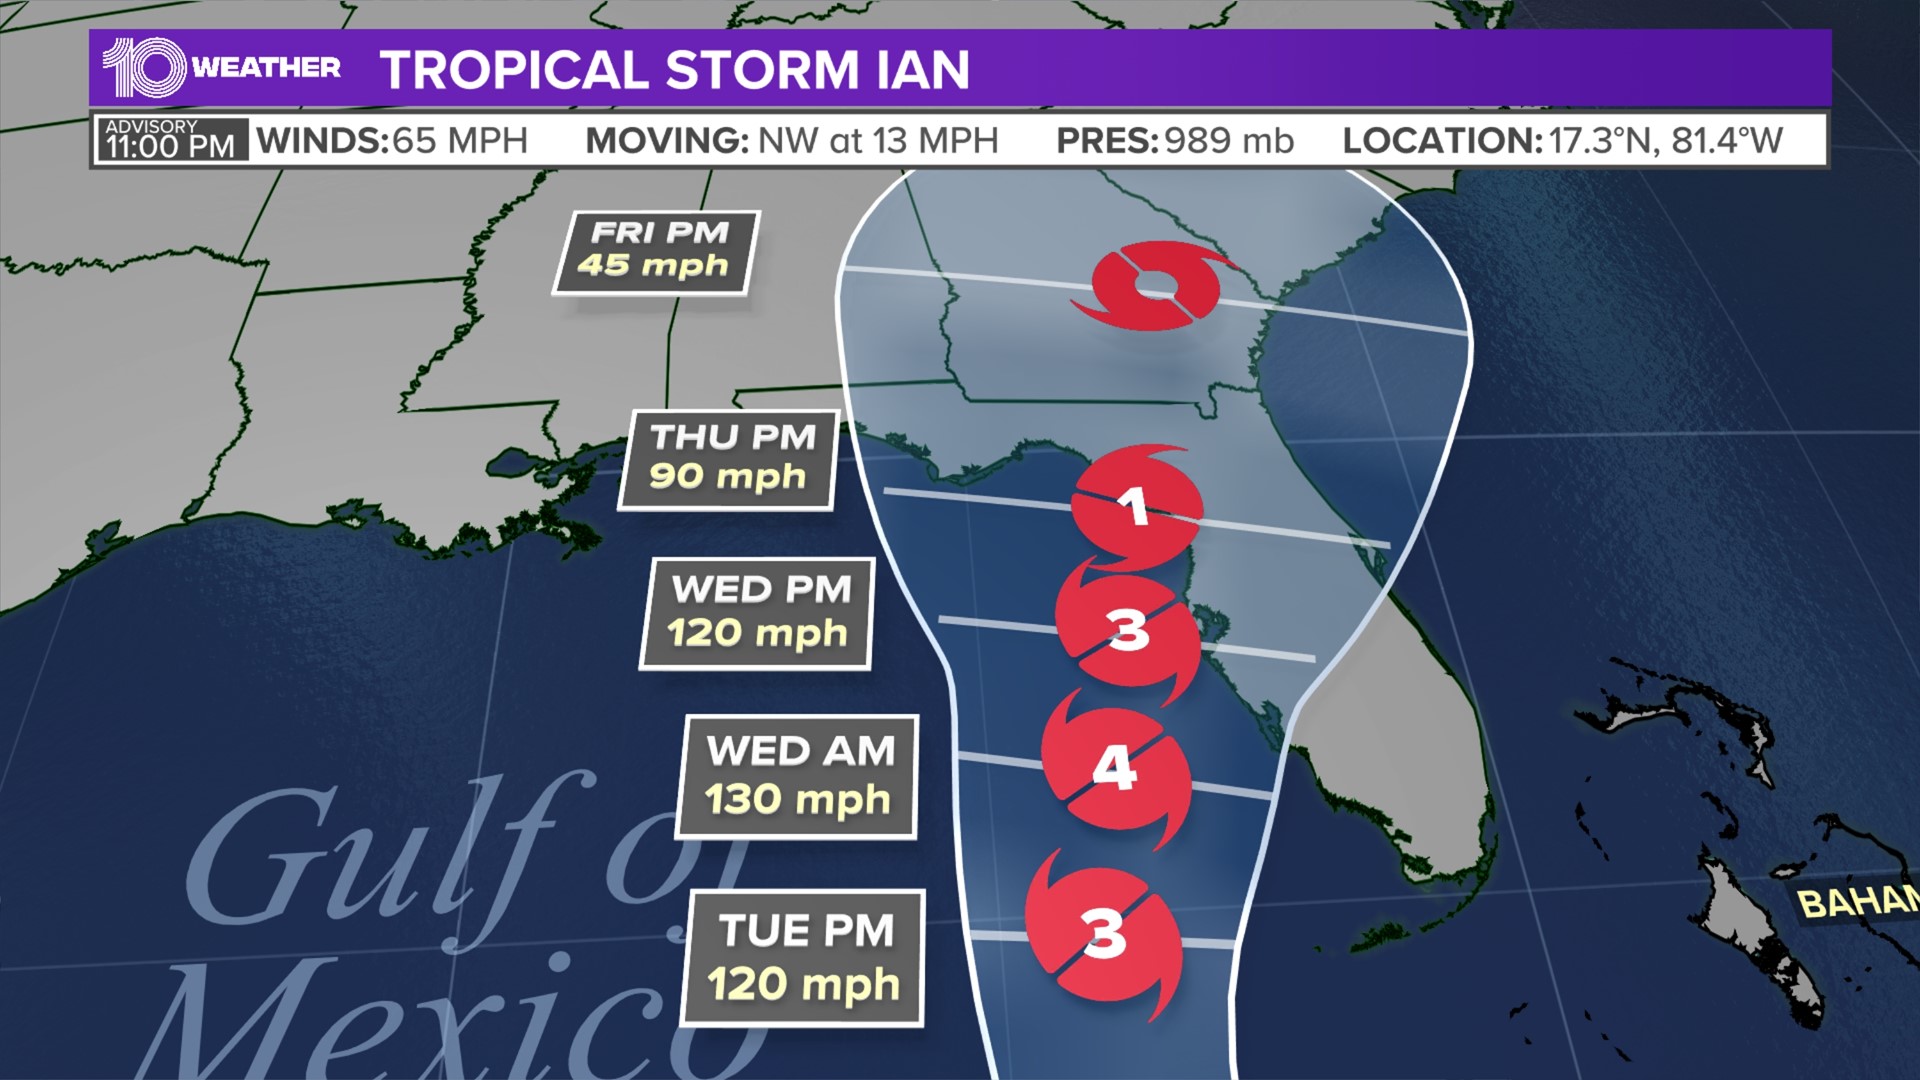 Tropical Storm Ian remains forecast to rapidly intensify and become a hurricane sometime Monday, according to the National Hurricane Center.